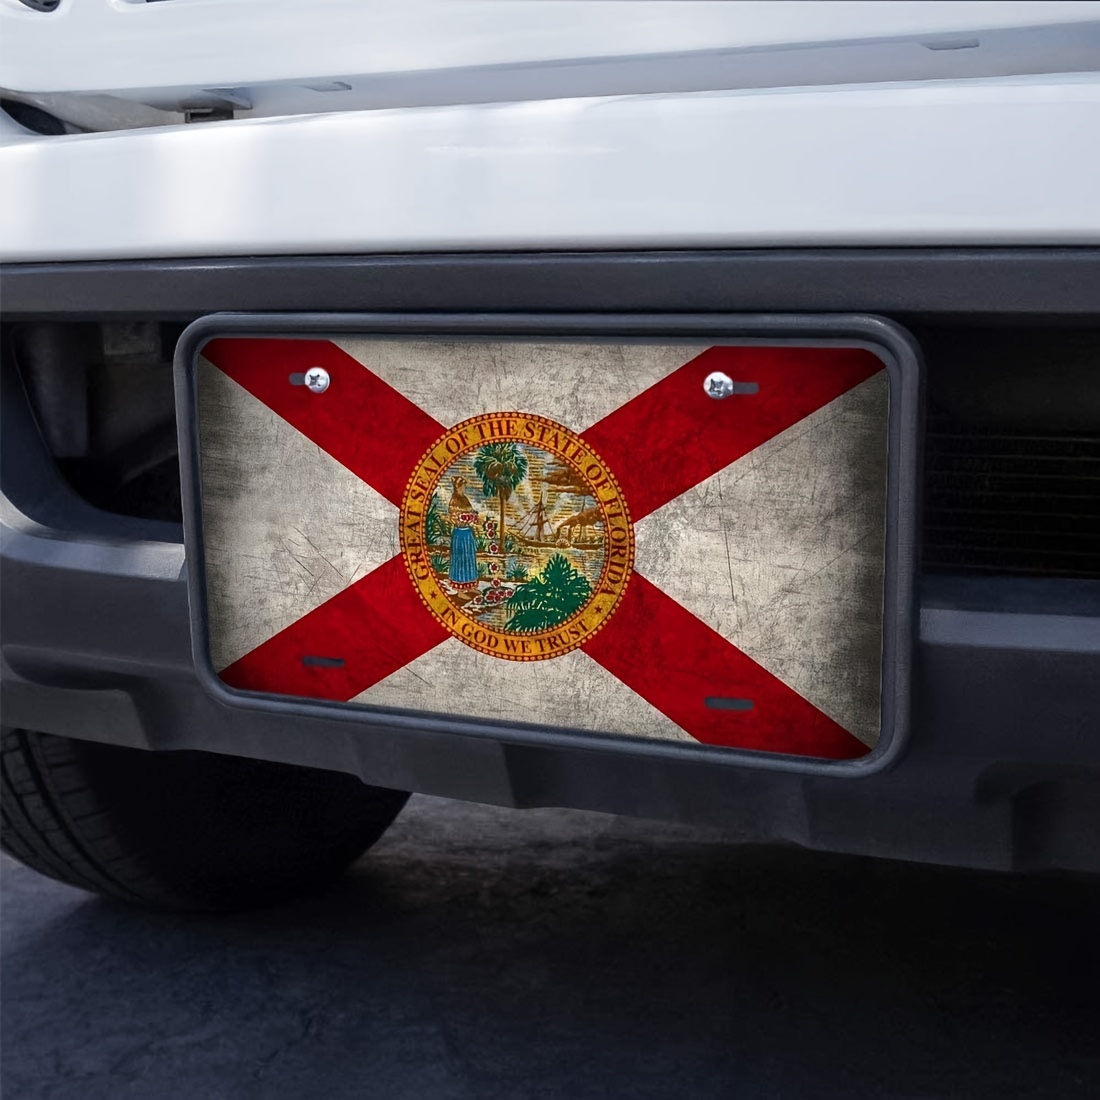 Show Your Florida Pride With This Custom Sunshine State License Plate, Shop The Latest Trends